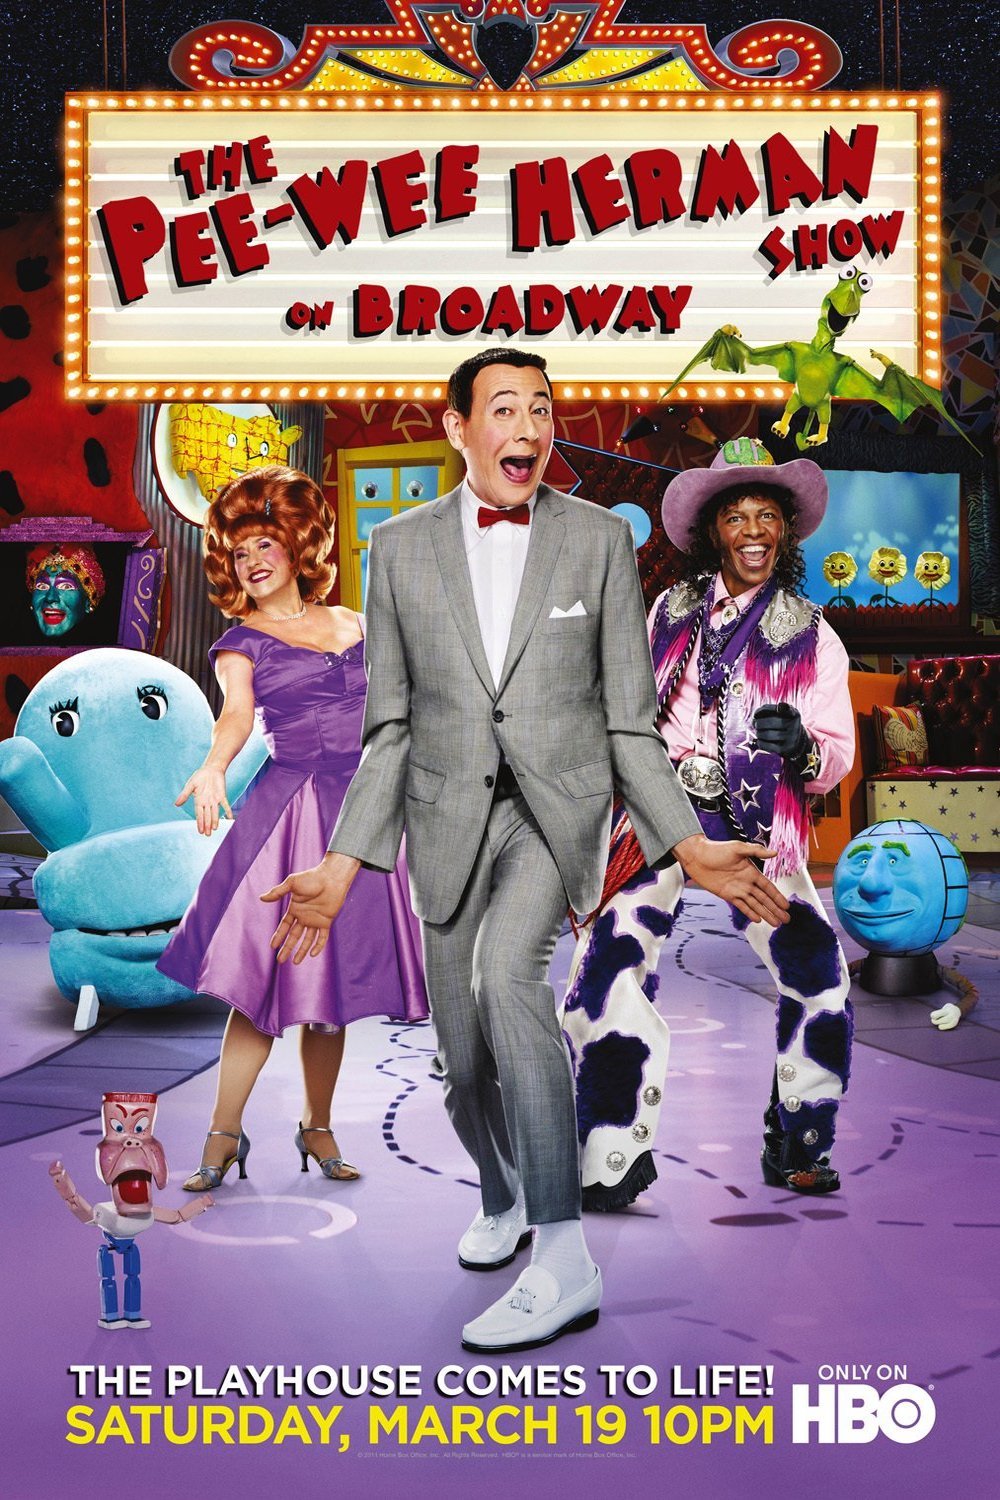 L'affiche du film The Pee-Wee Herman Show on Broadway